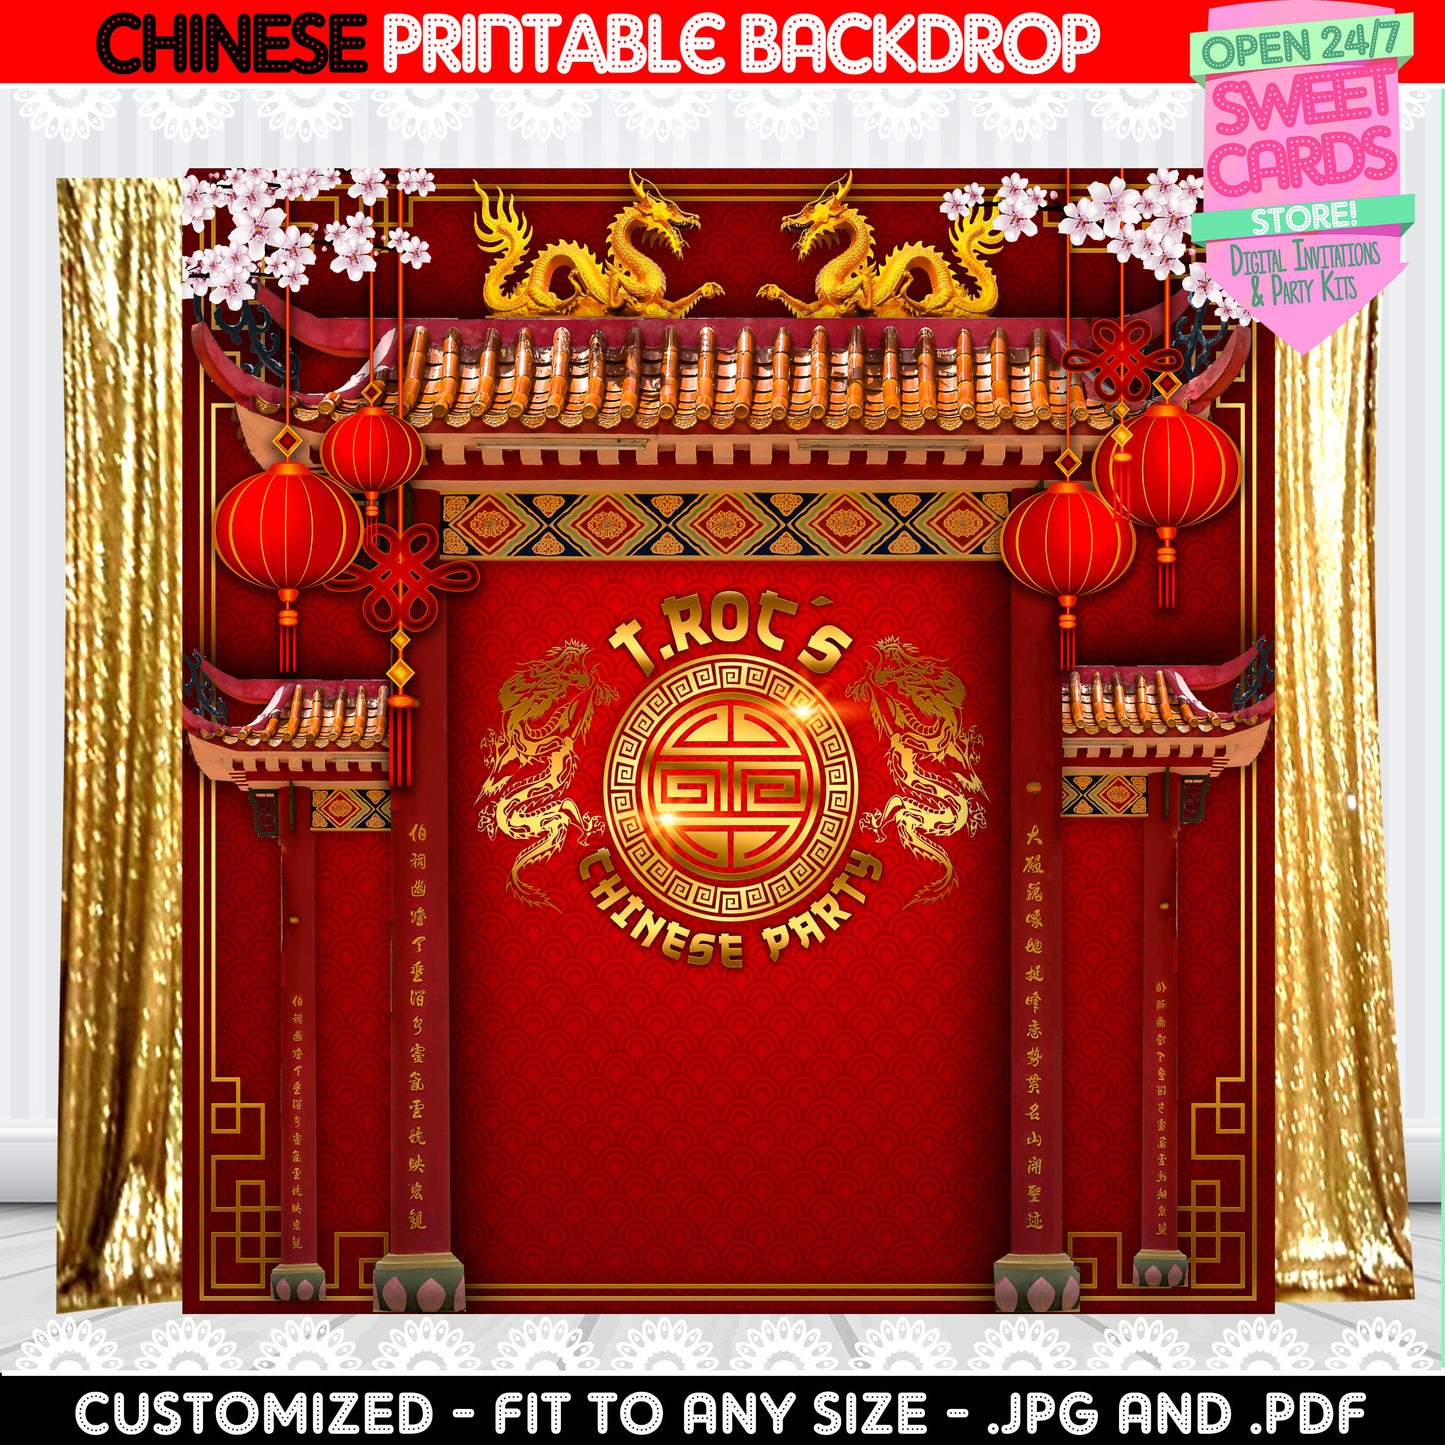 Chinese Party Printable Backdrop, Chinese Party Backdrop, Chinese Party Decor, Chinese Party Printables, Chinese Party, Chinese Party Style